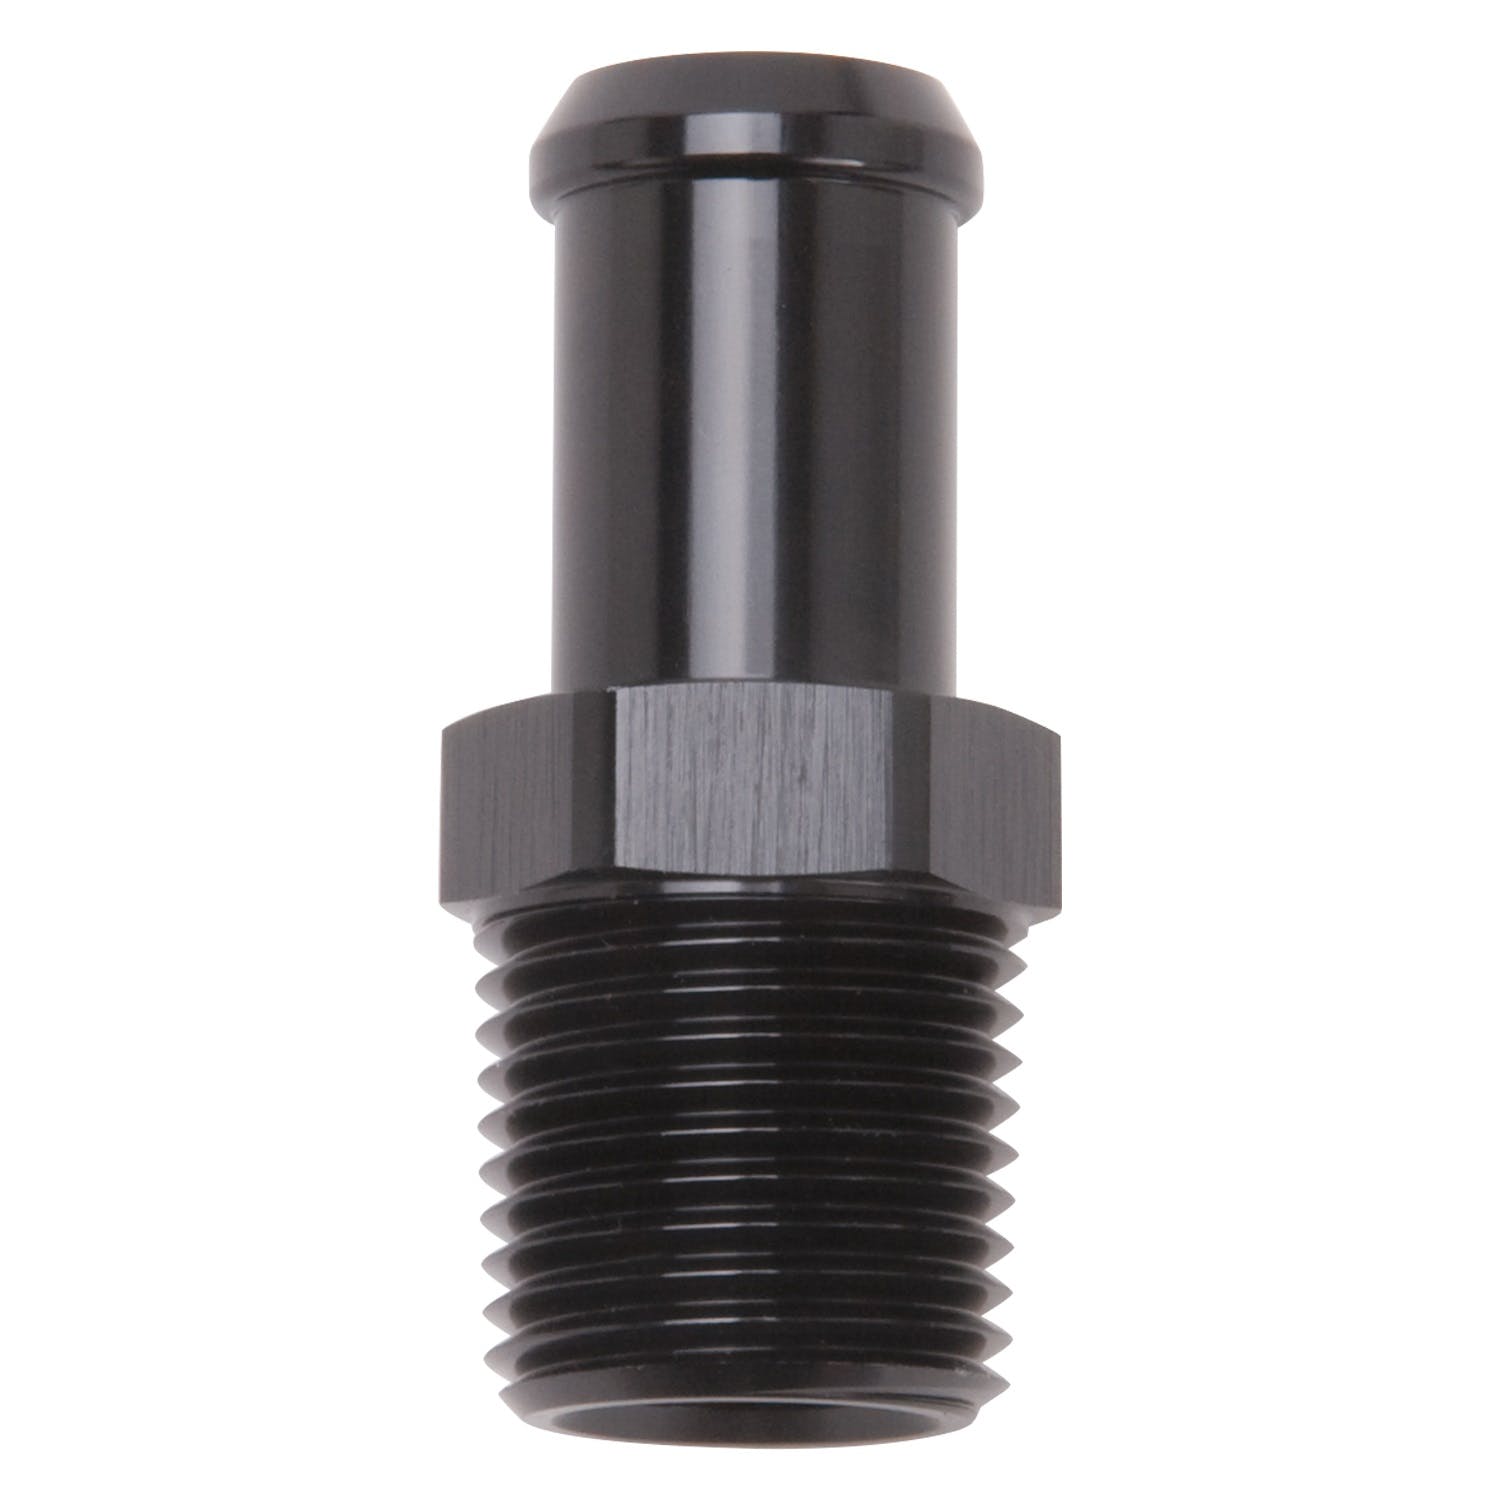 Edelbrock 8159 Heater Hose End Fitting - Straight with 1/2 NPT and 5/8 Barb.